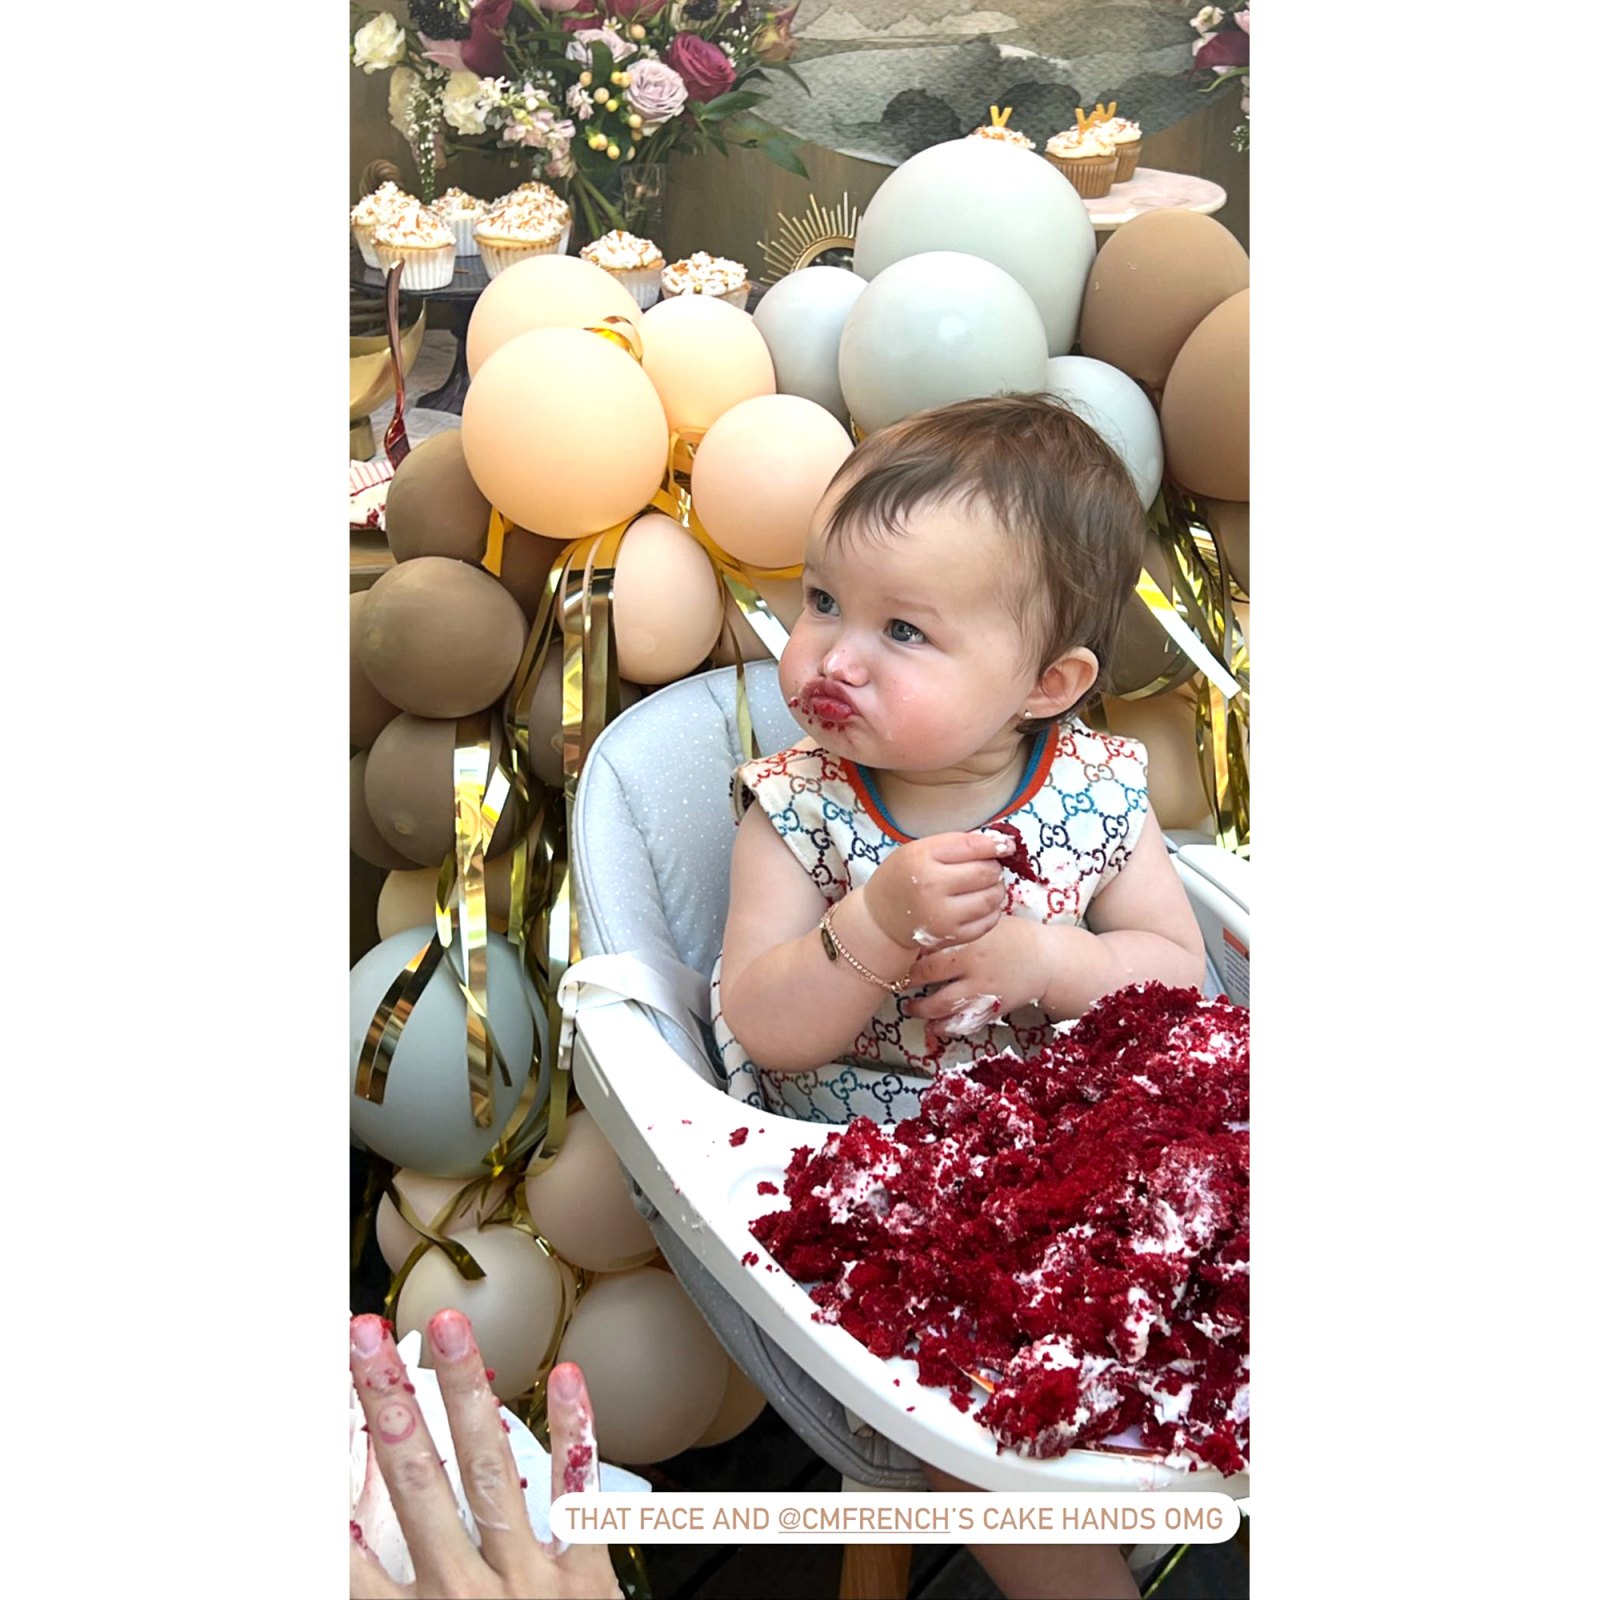 Jupiter Is 1! Ashley Tisdale Celebrates Her Daughter’s Birthday Party